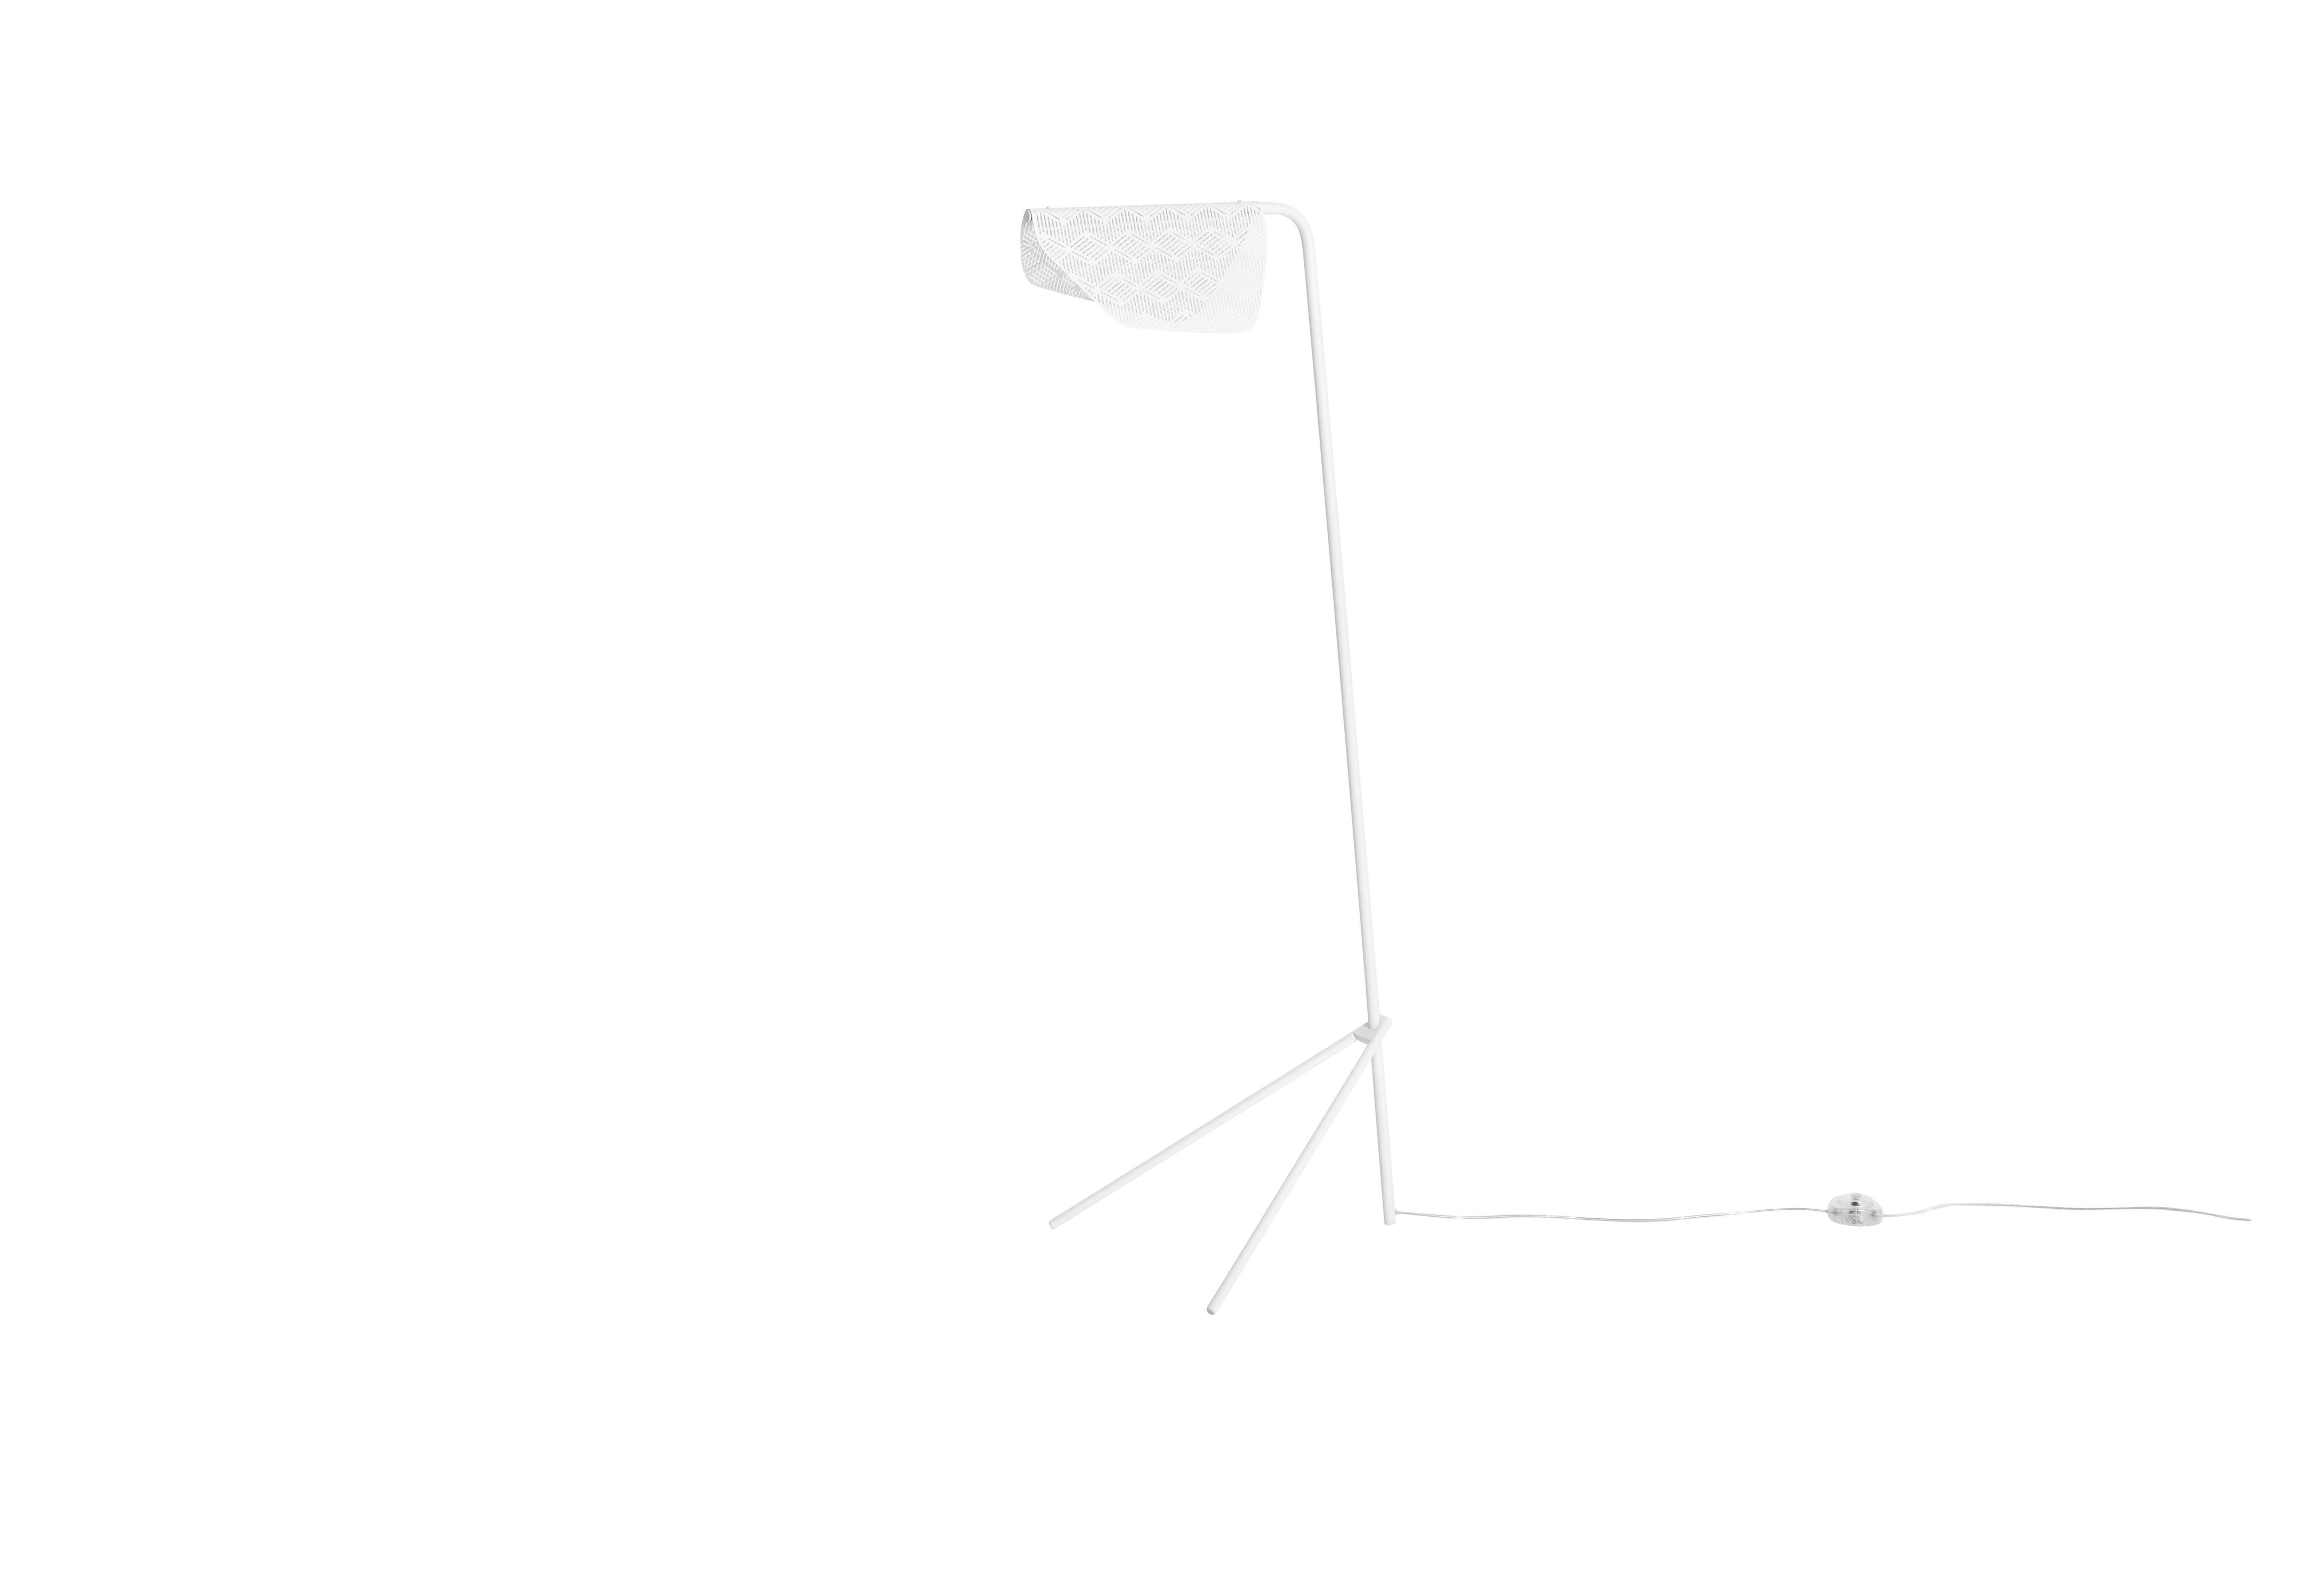 French Petite Friture Mediterranea Floor Lamp in White by Noé Duchaufour-Lawrance, 2016 For Sale